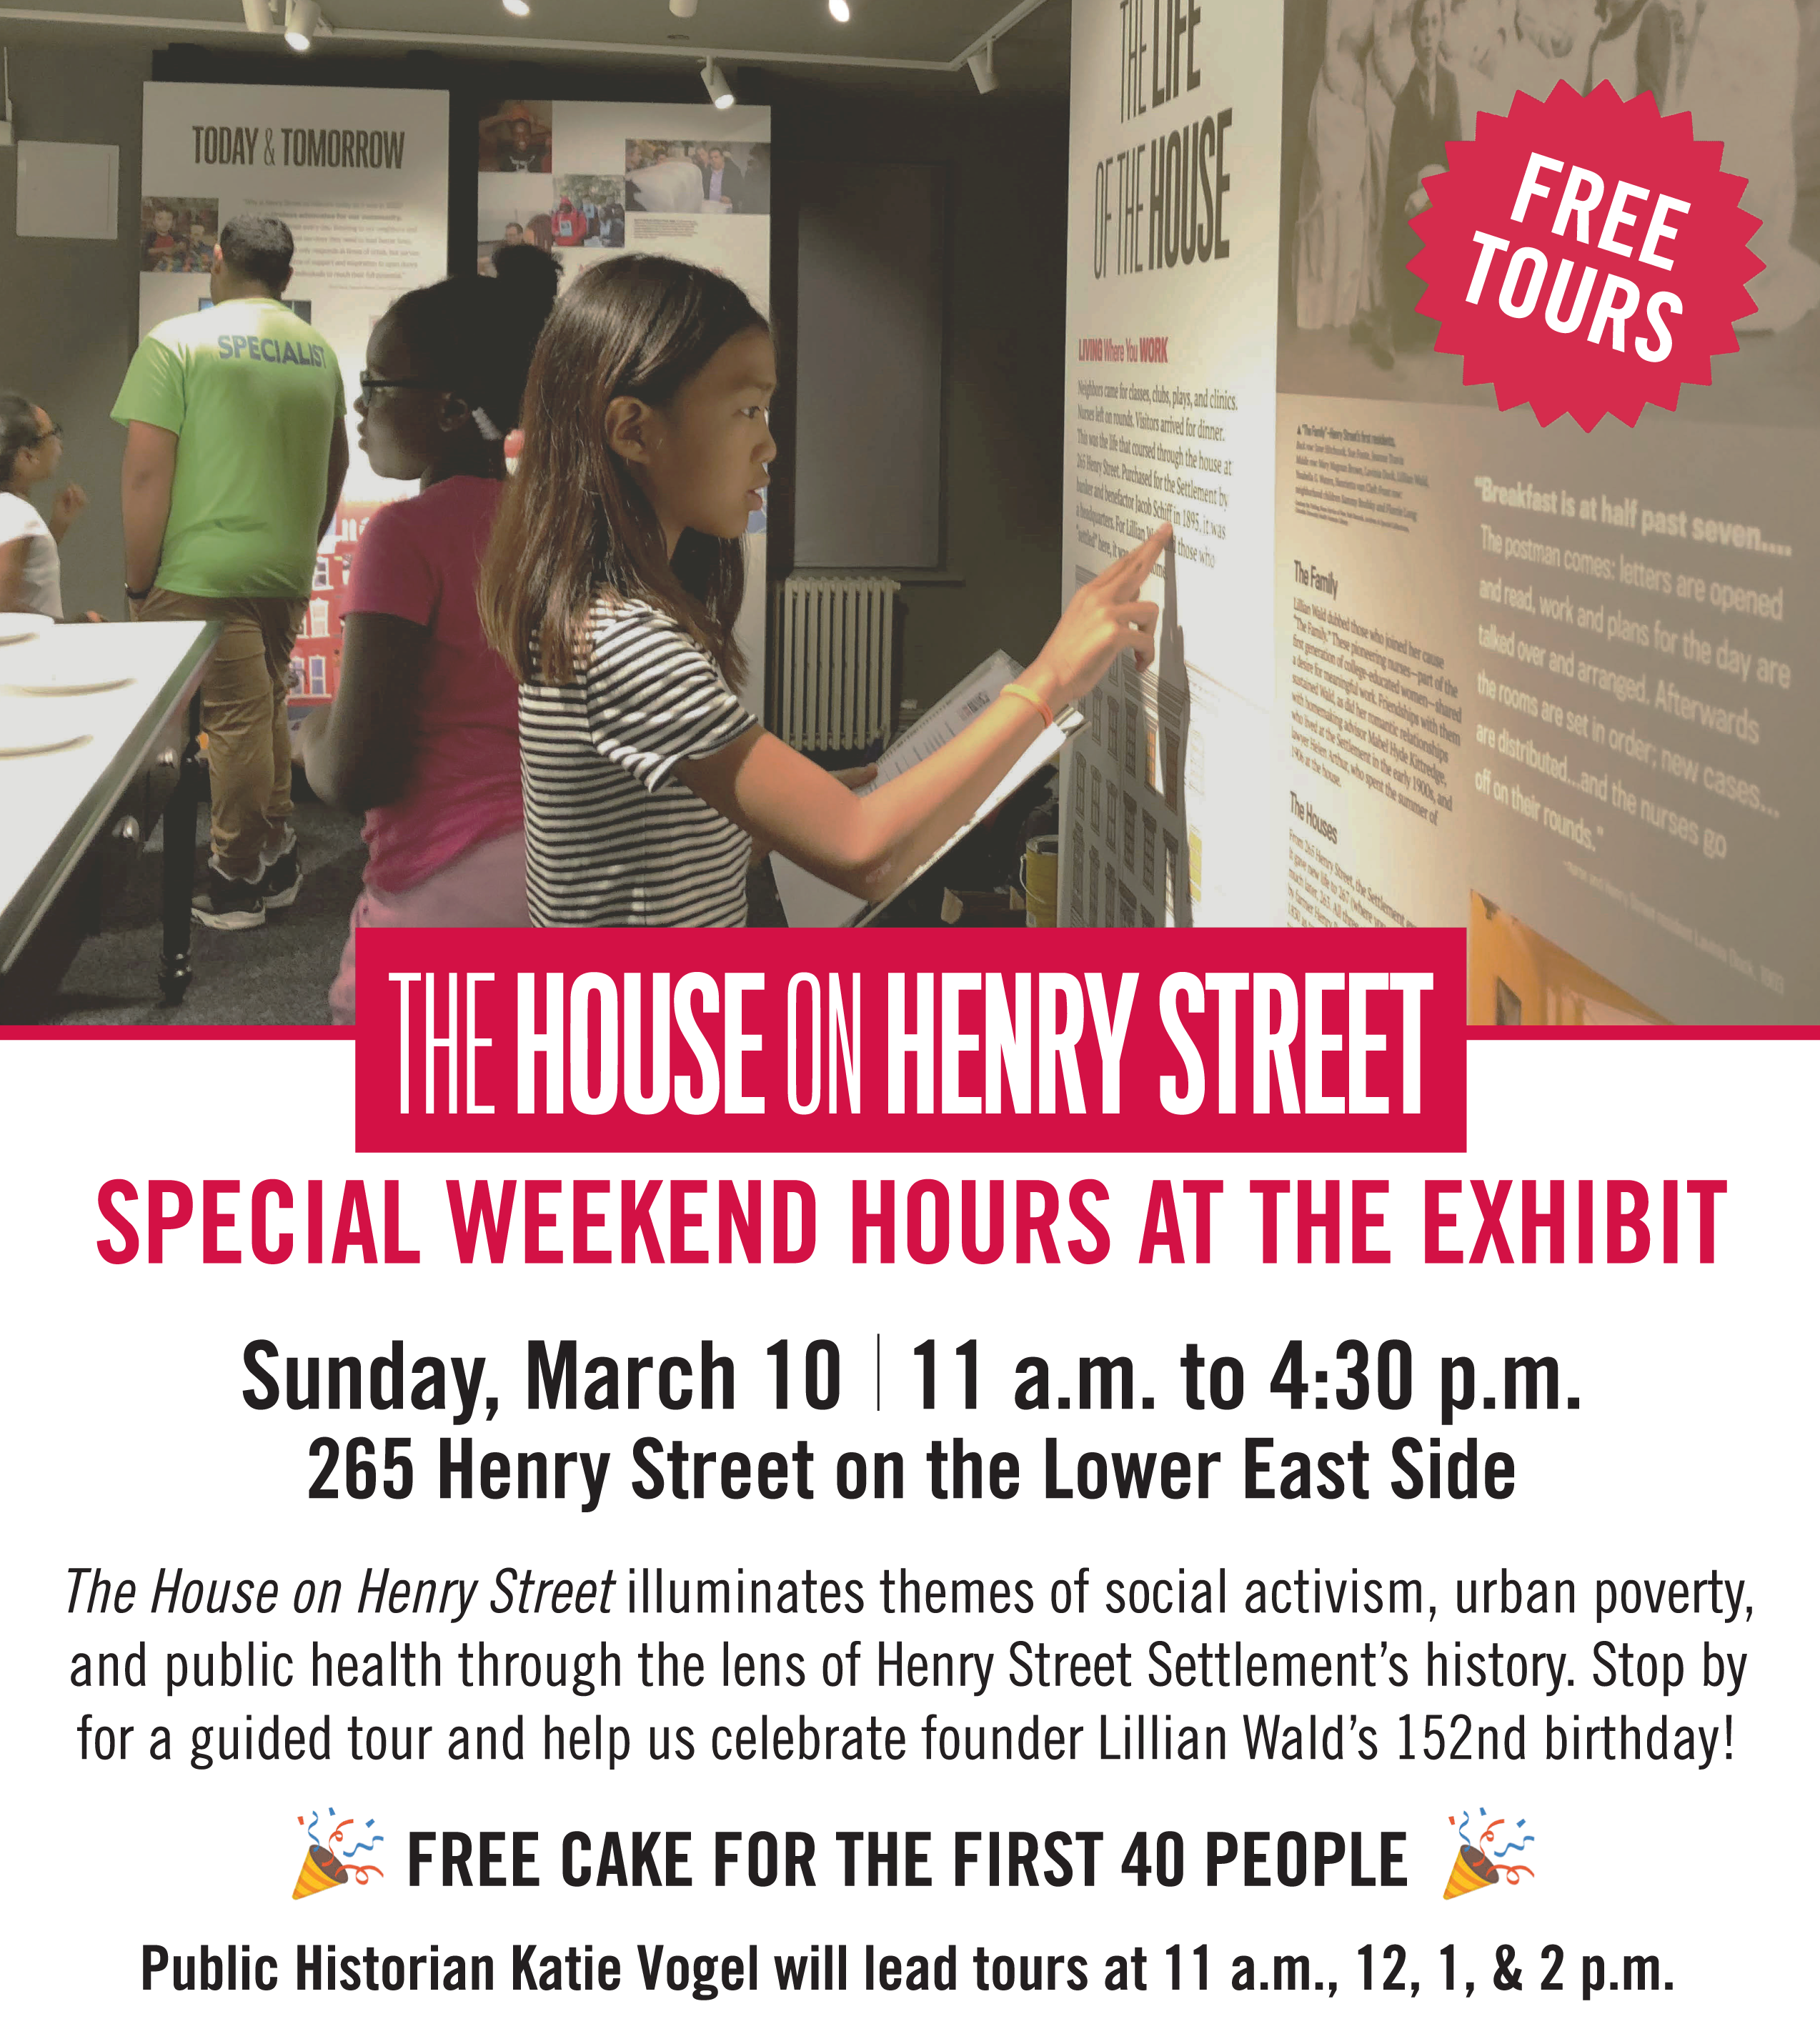 Flyer advertising special weekend hours of House on Henry Street exhibition, March 2019